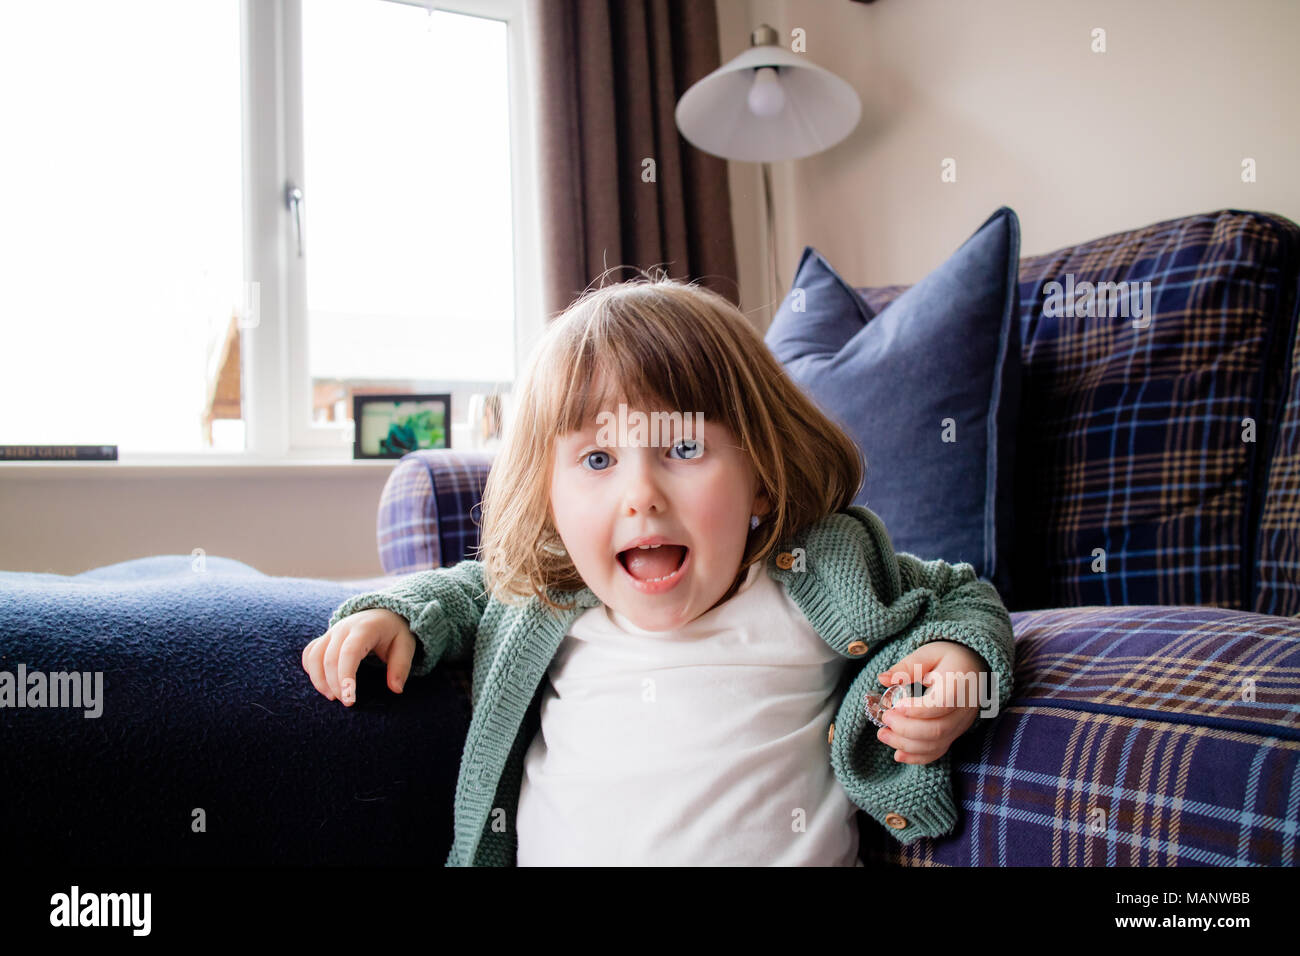 A young girl screaming at the camera in the house. Stock Photo